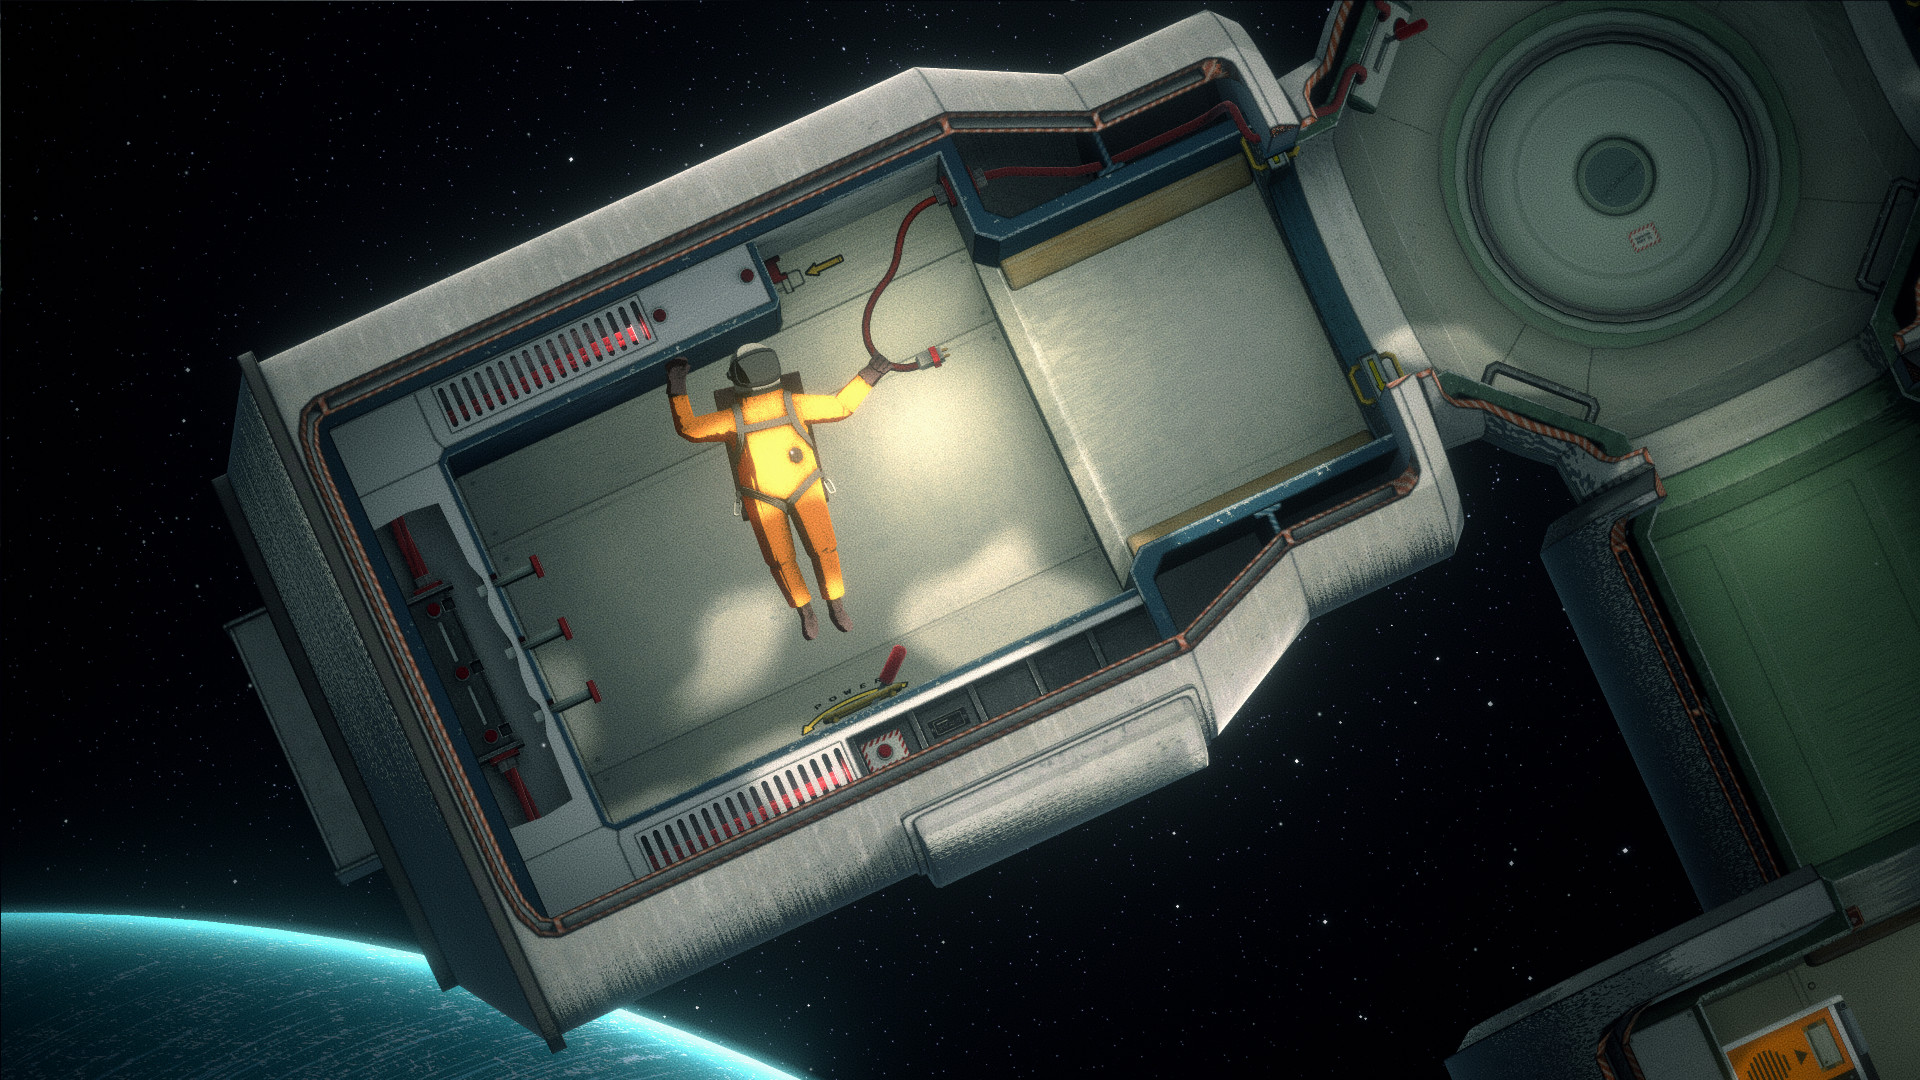 Space Physics Game 'Heavenly Bodies' Gets 4-Player Co-op and Major DLC